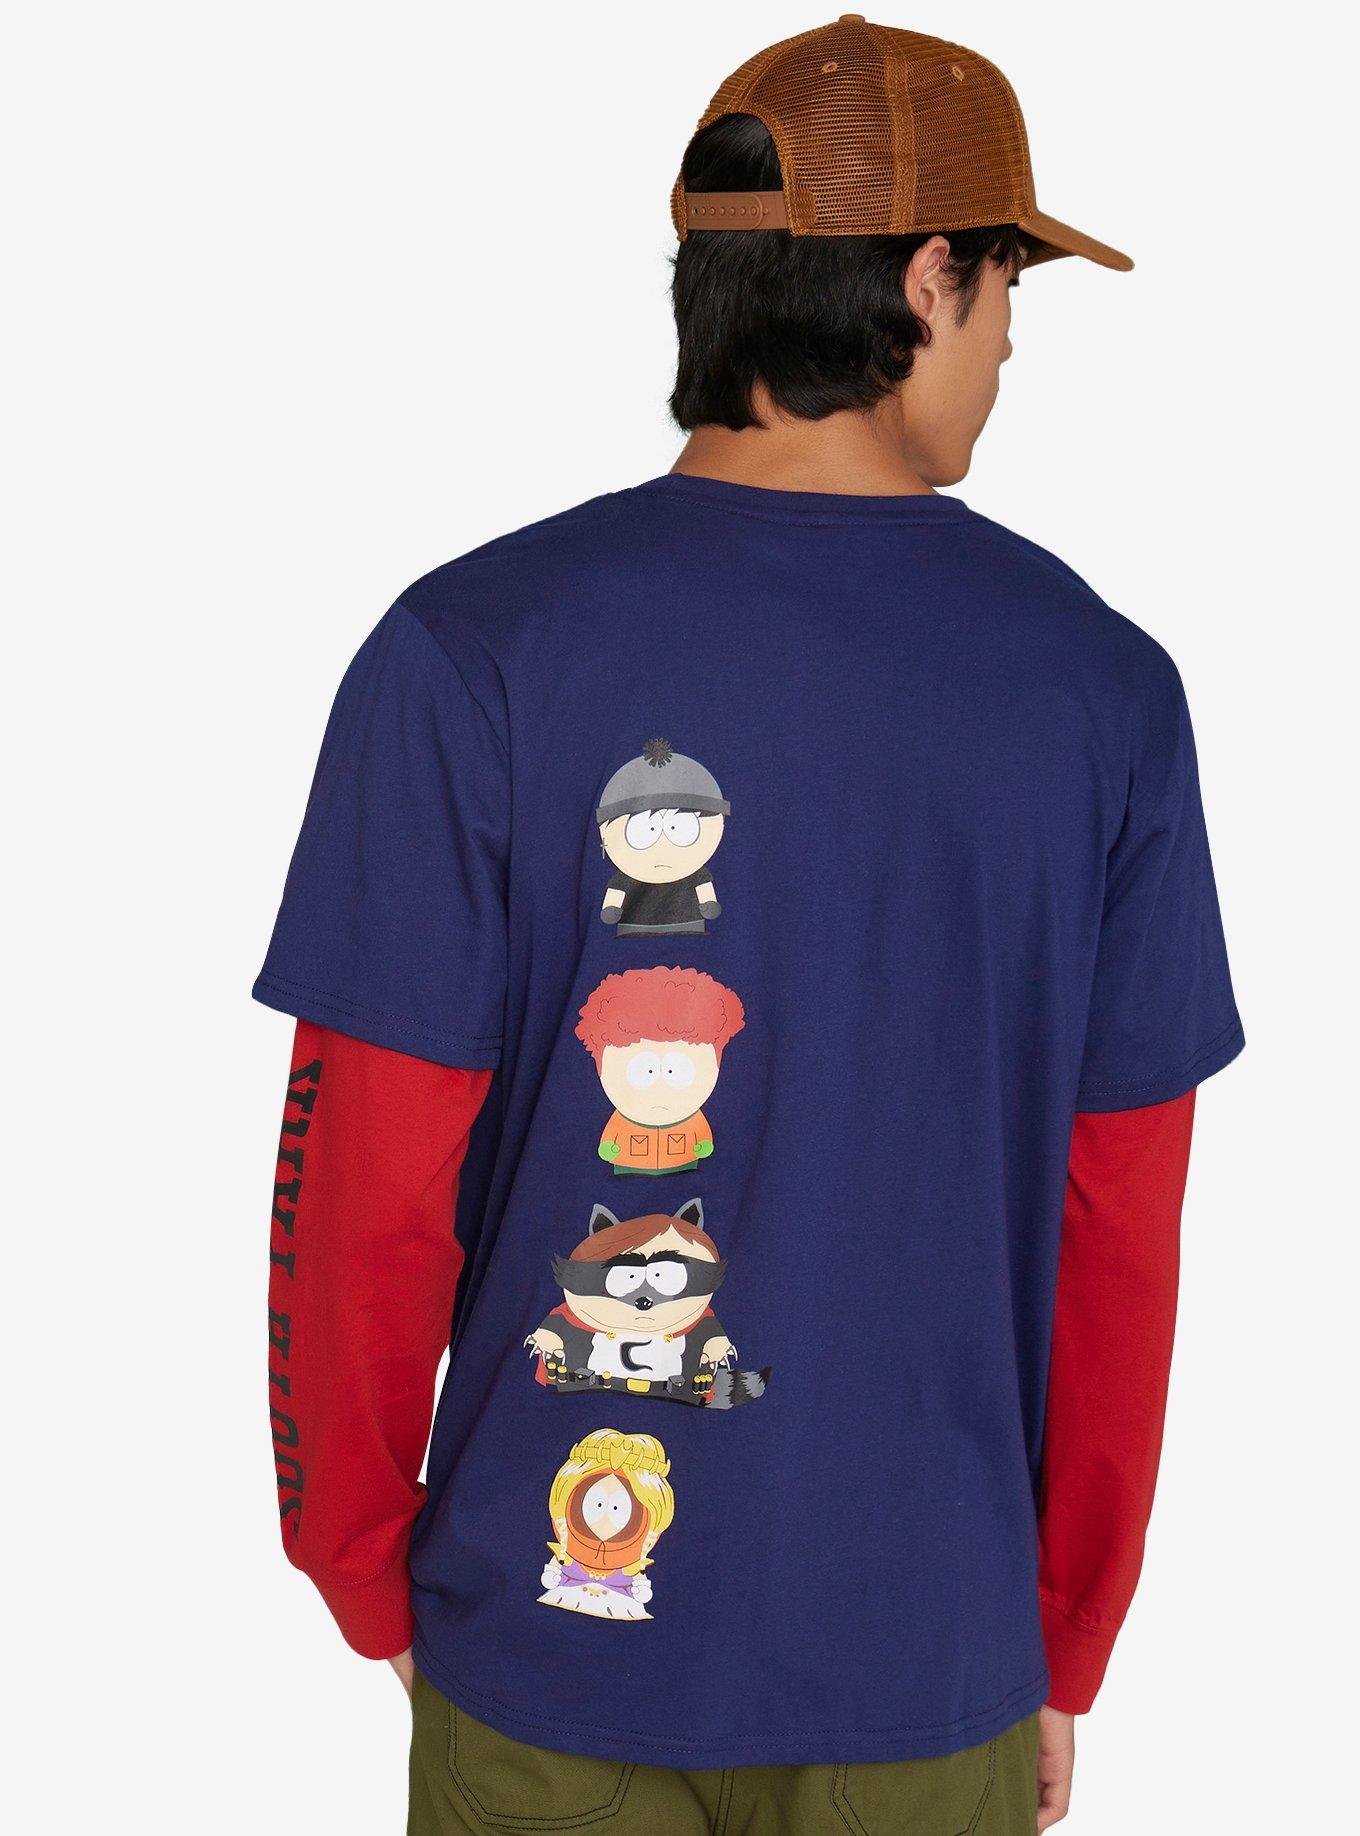 South Park Character Outfits Long-Sleeve Twofer, , hi-res